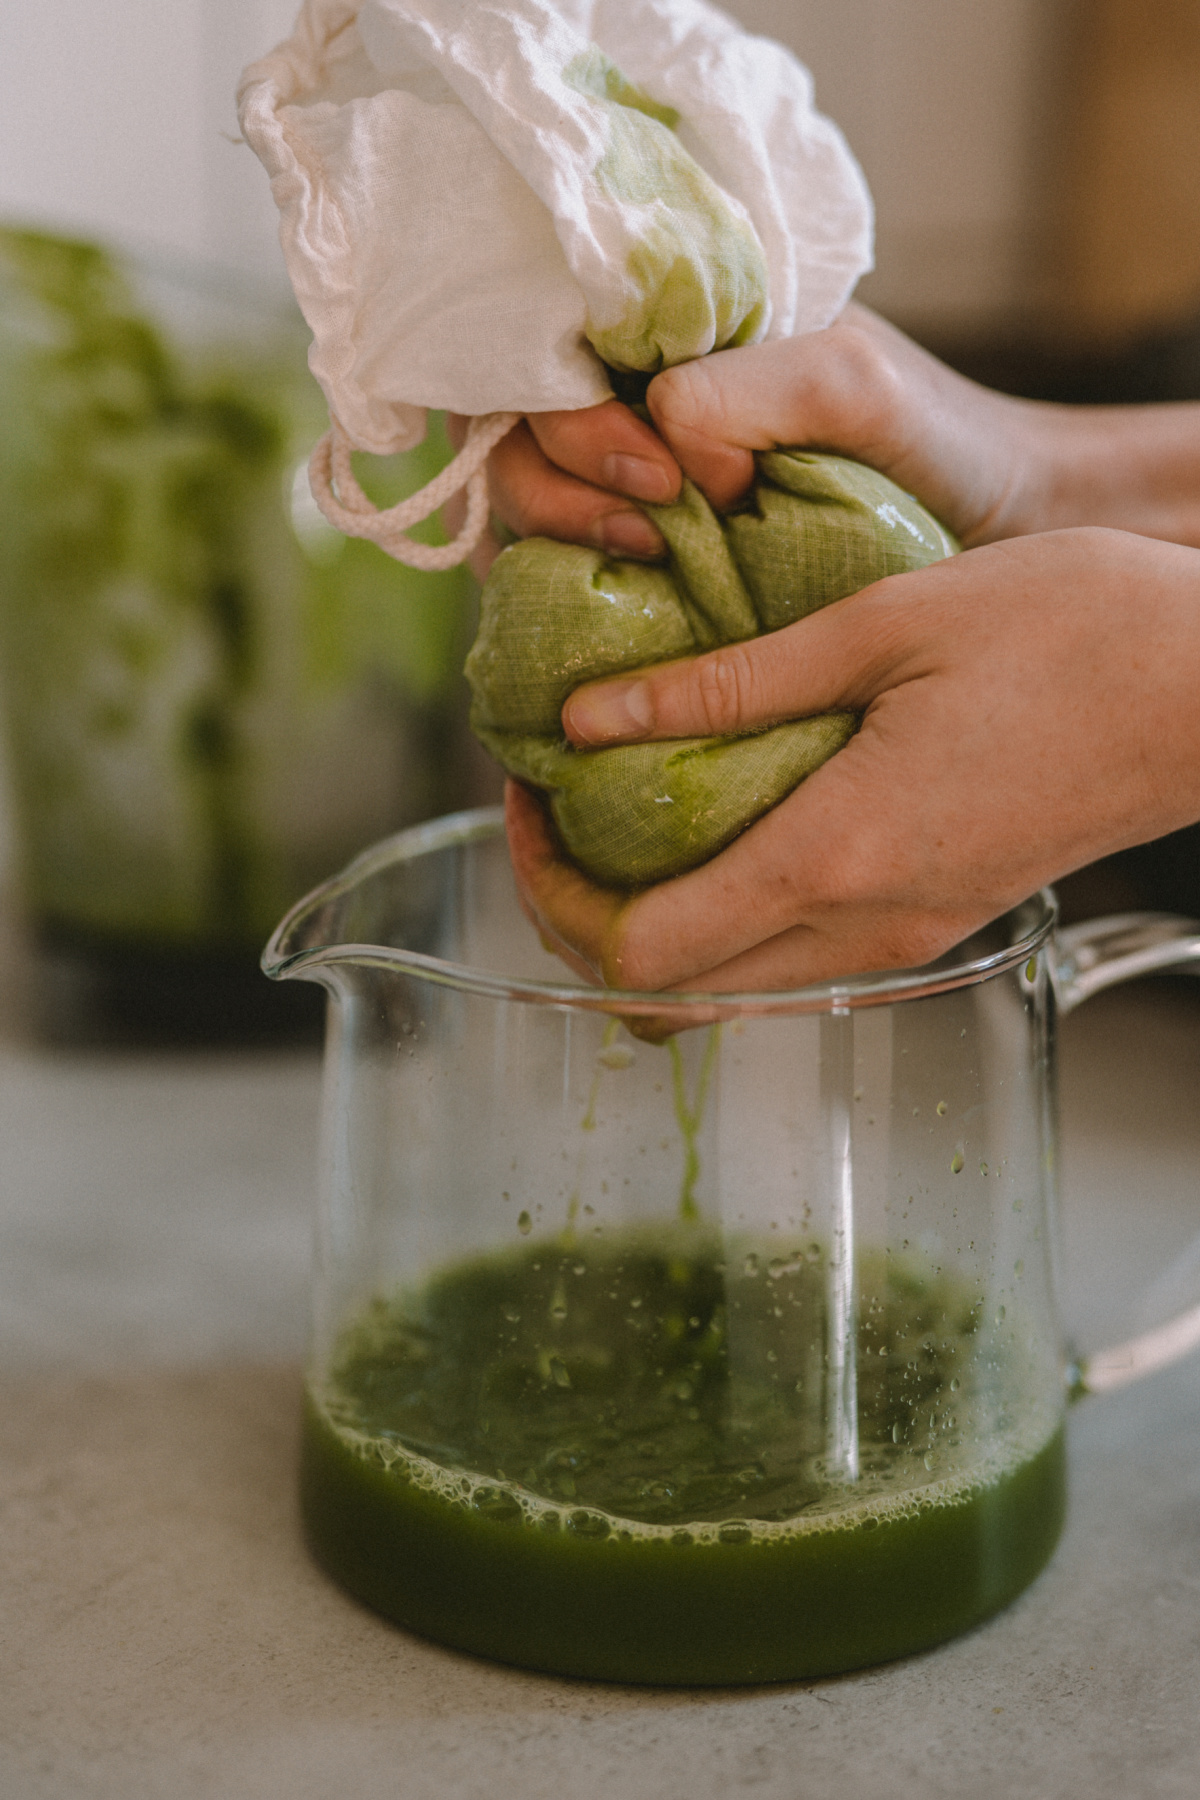 squeezing a cheesecloth of green juice into a measuring jar